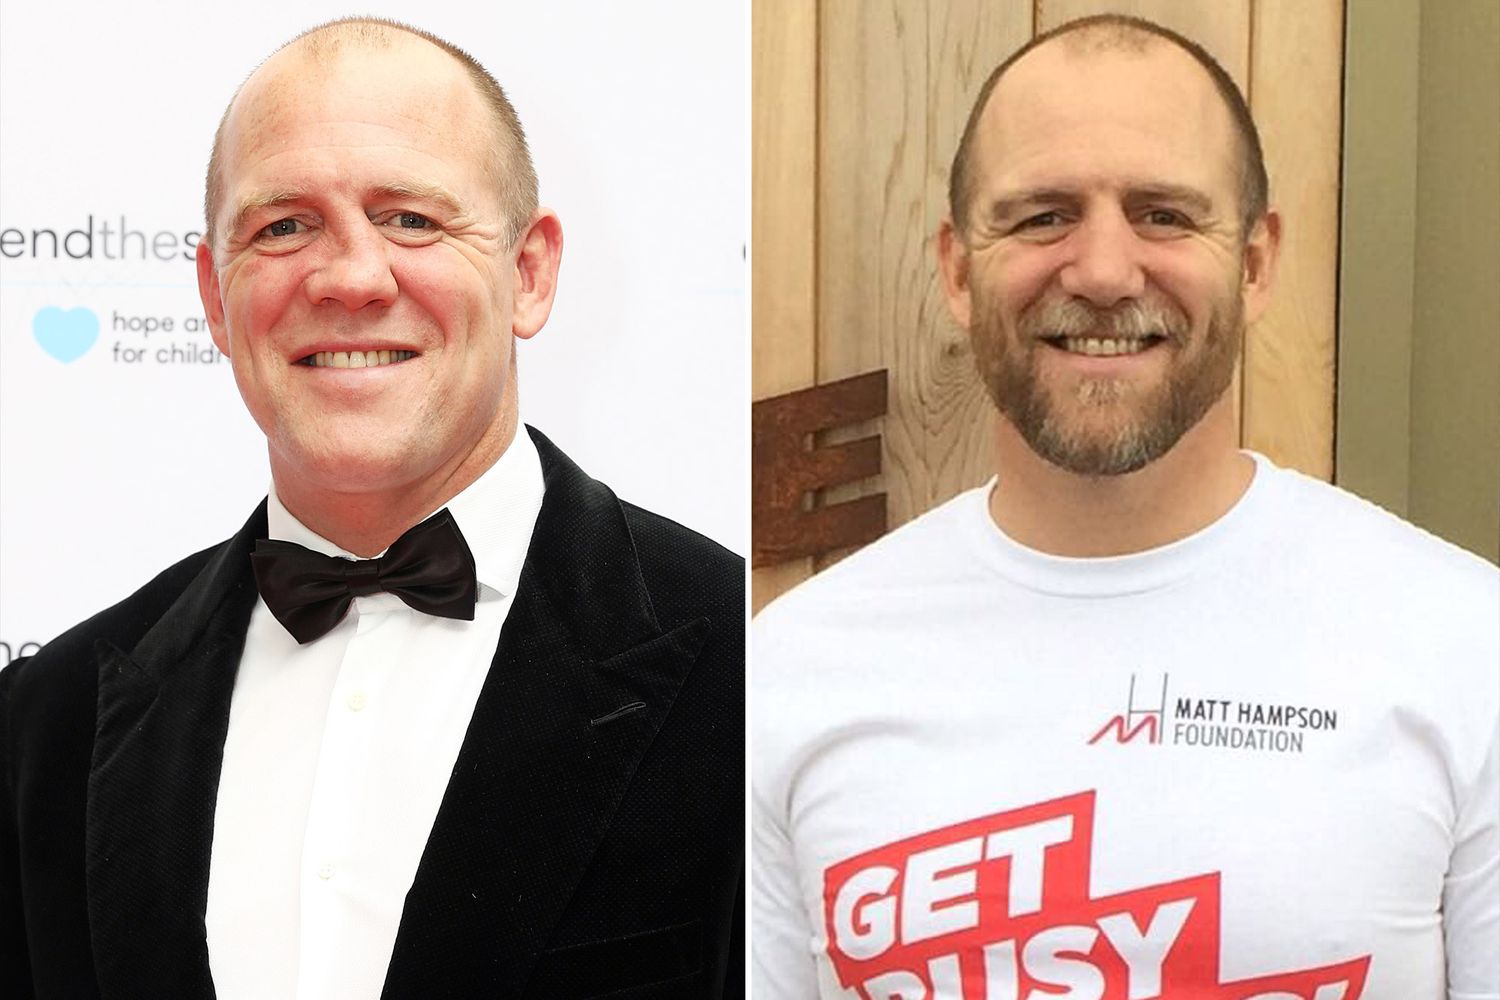 Mike Tindall Got His Famously Crooked Nose Fixed | PEOPLE.com